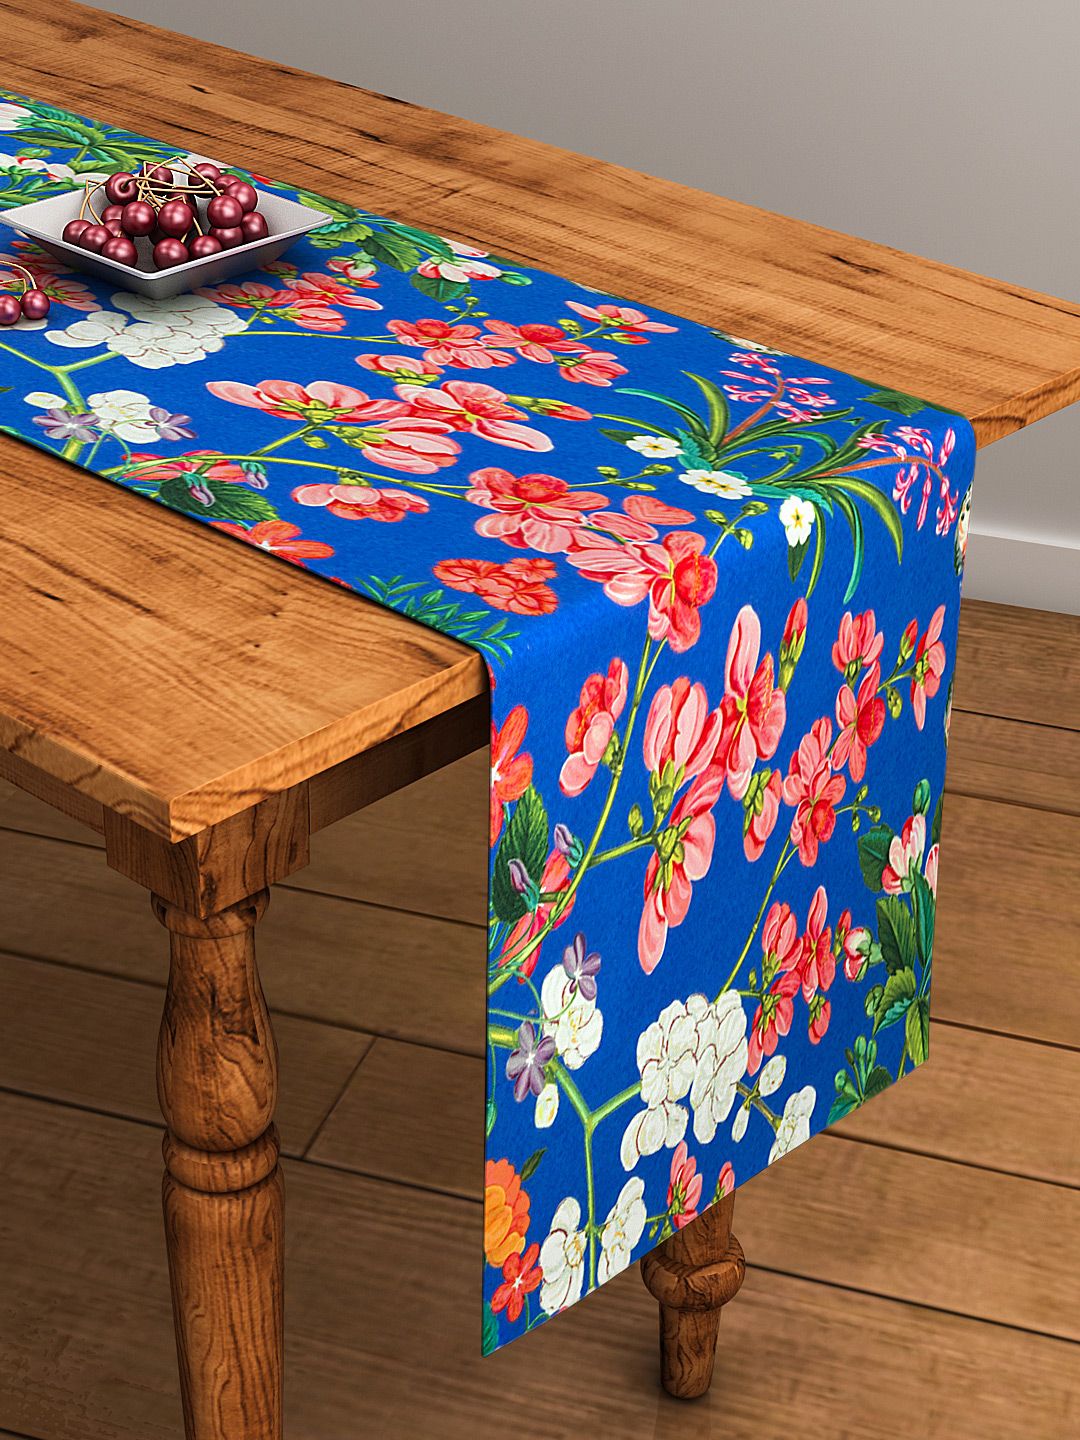 SEJ by Nisha Gupta Blue Floral Print Rectangular Cotton Table Runner Price in India